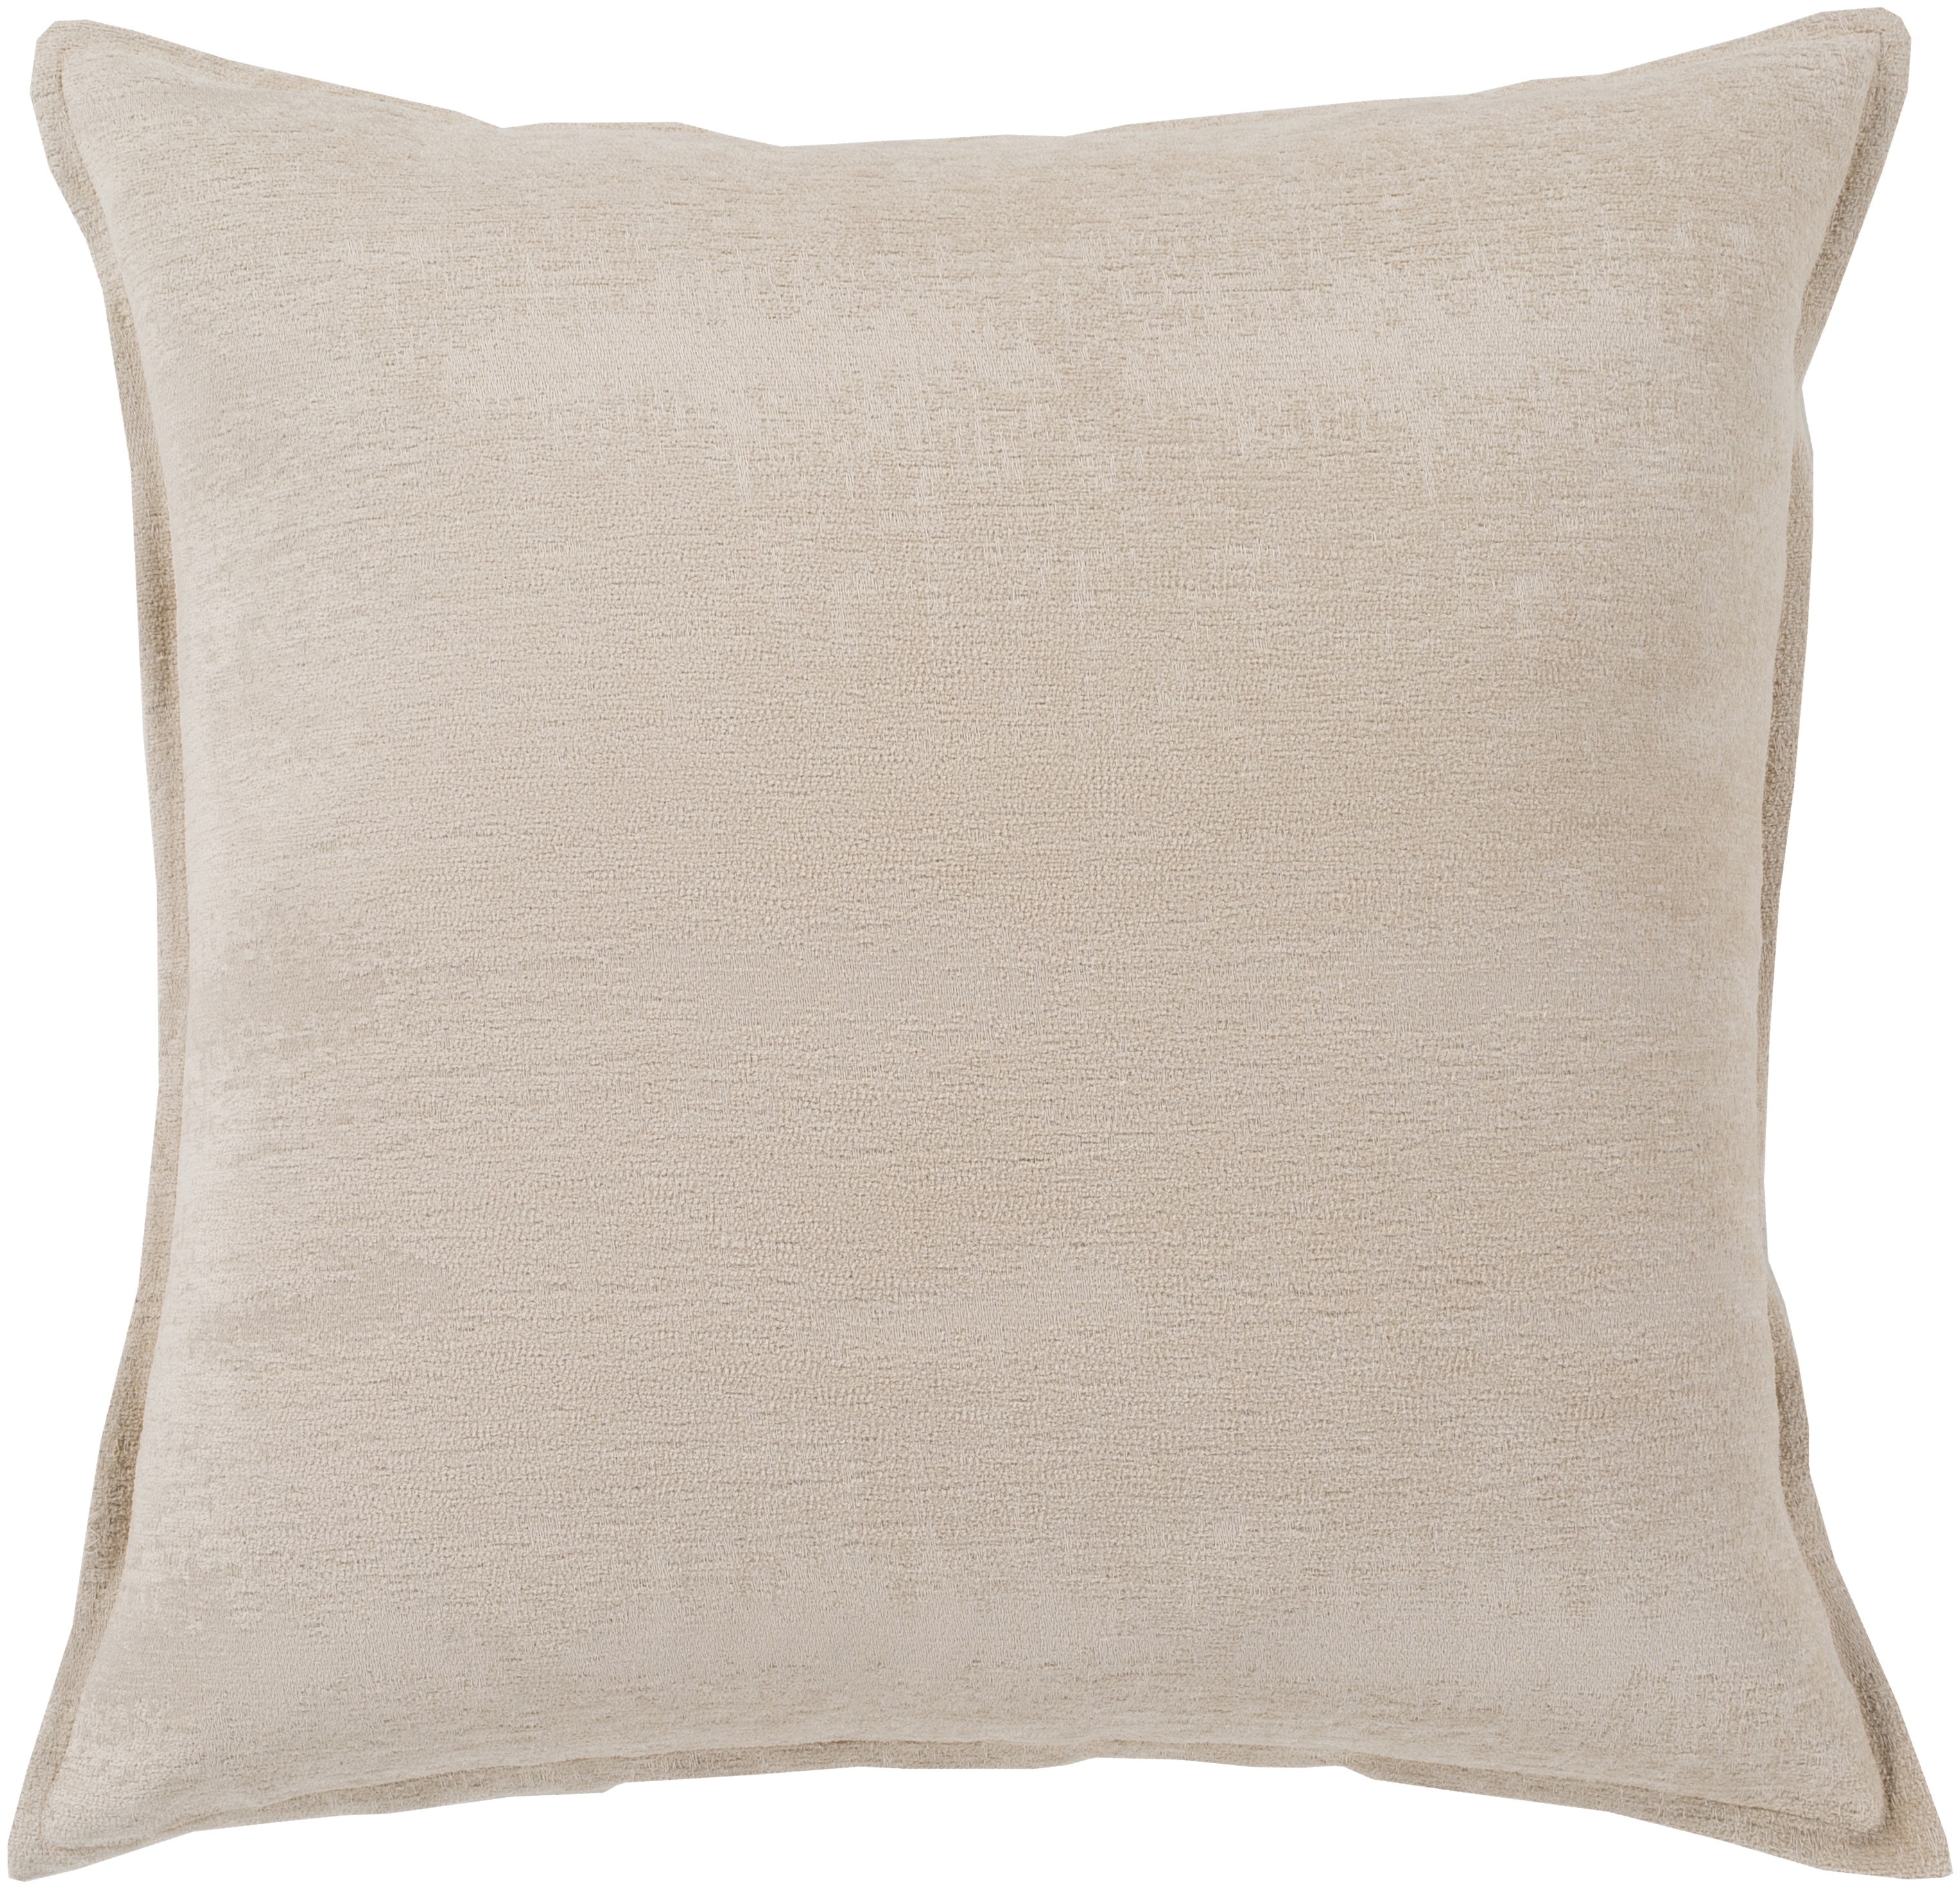 Copacetic Throw Pillow, 20" x 20", with down insert - Image 0